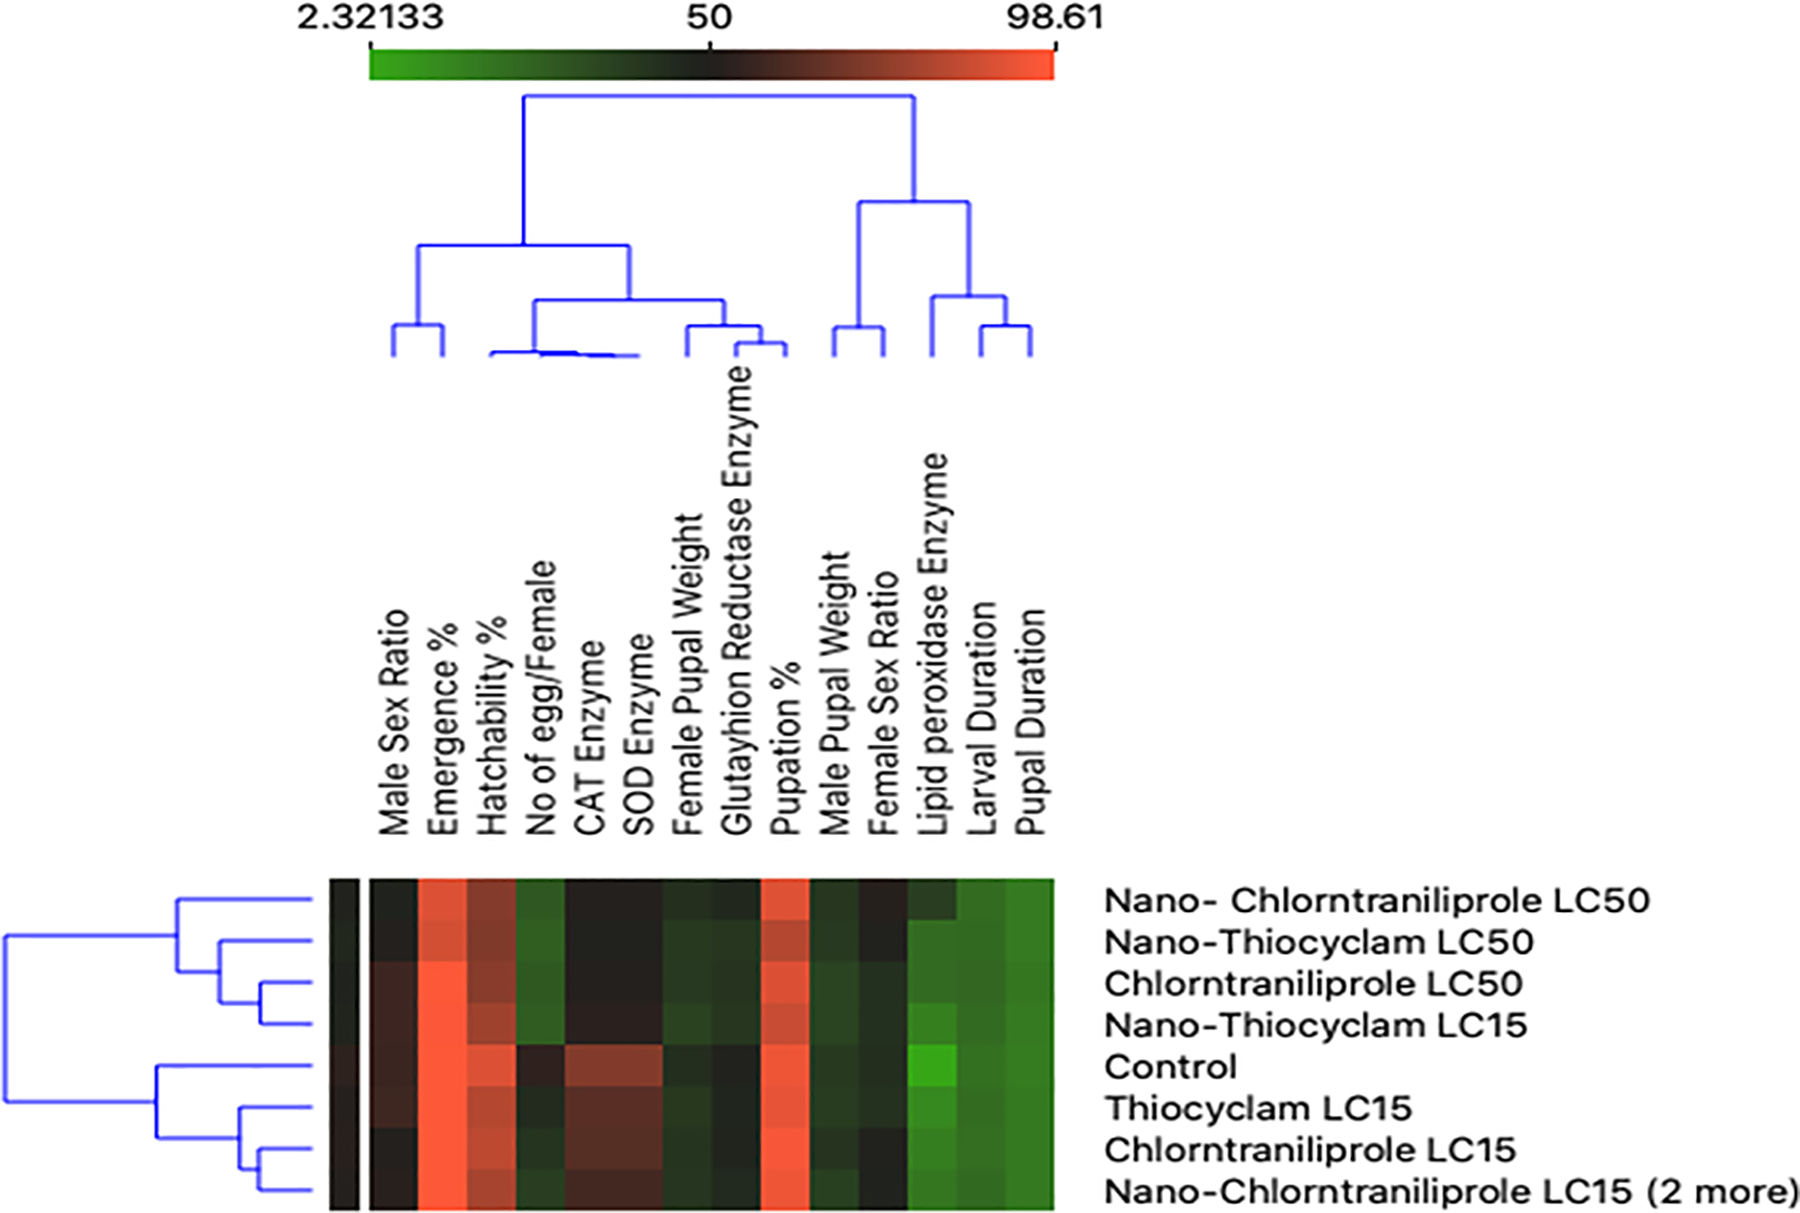 Two-dimensional heatmap visualization shows the interaction between the treatments and (A) the eight developmental parameters (B) the two reproductive activity parameters (C) the four enzymes’ parameters.